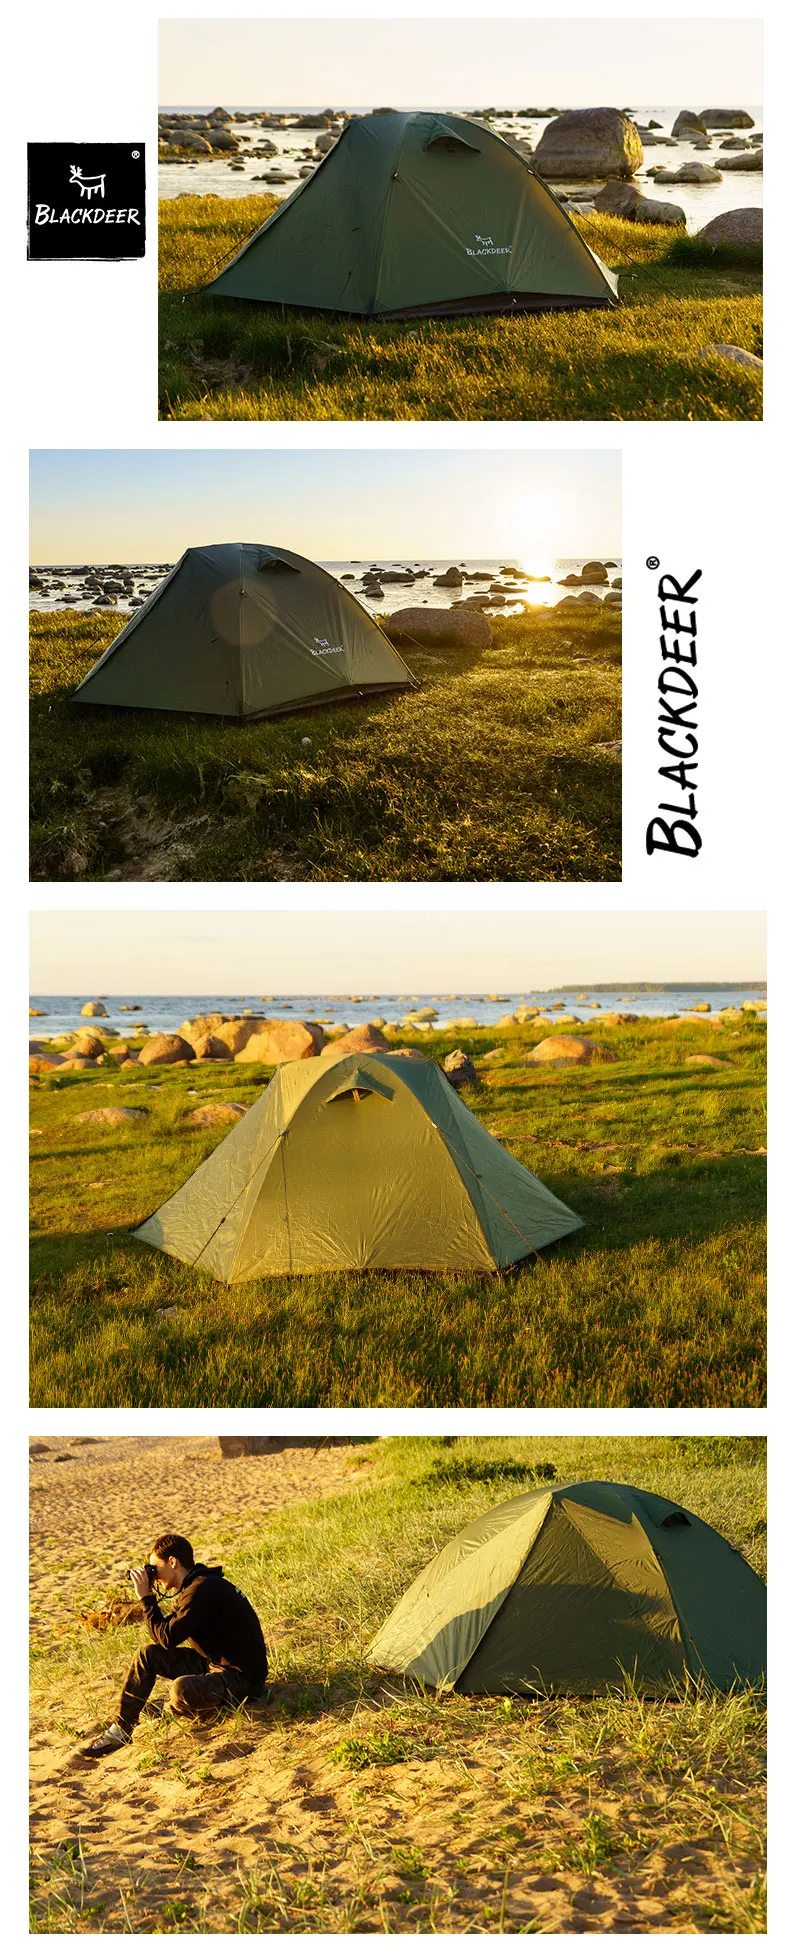 Blackdeer Archeos 2-3 People Backpacking Tent Outdoor Camping 4 Season Winter Skirt Tent Double Layer Waterproof Hiking Survival